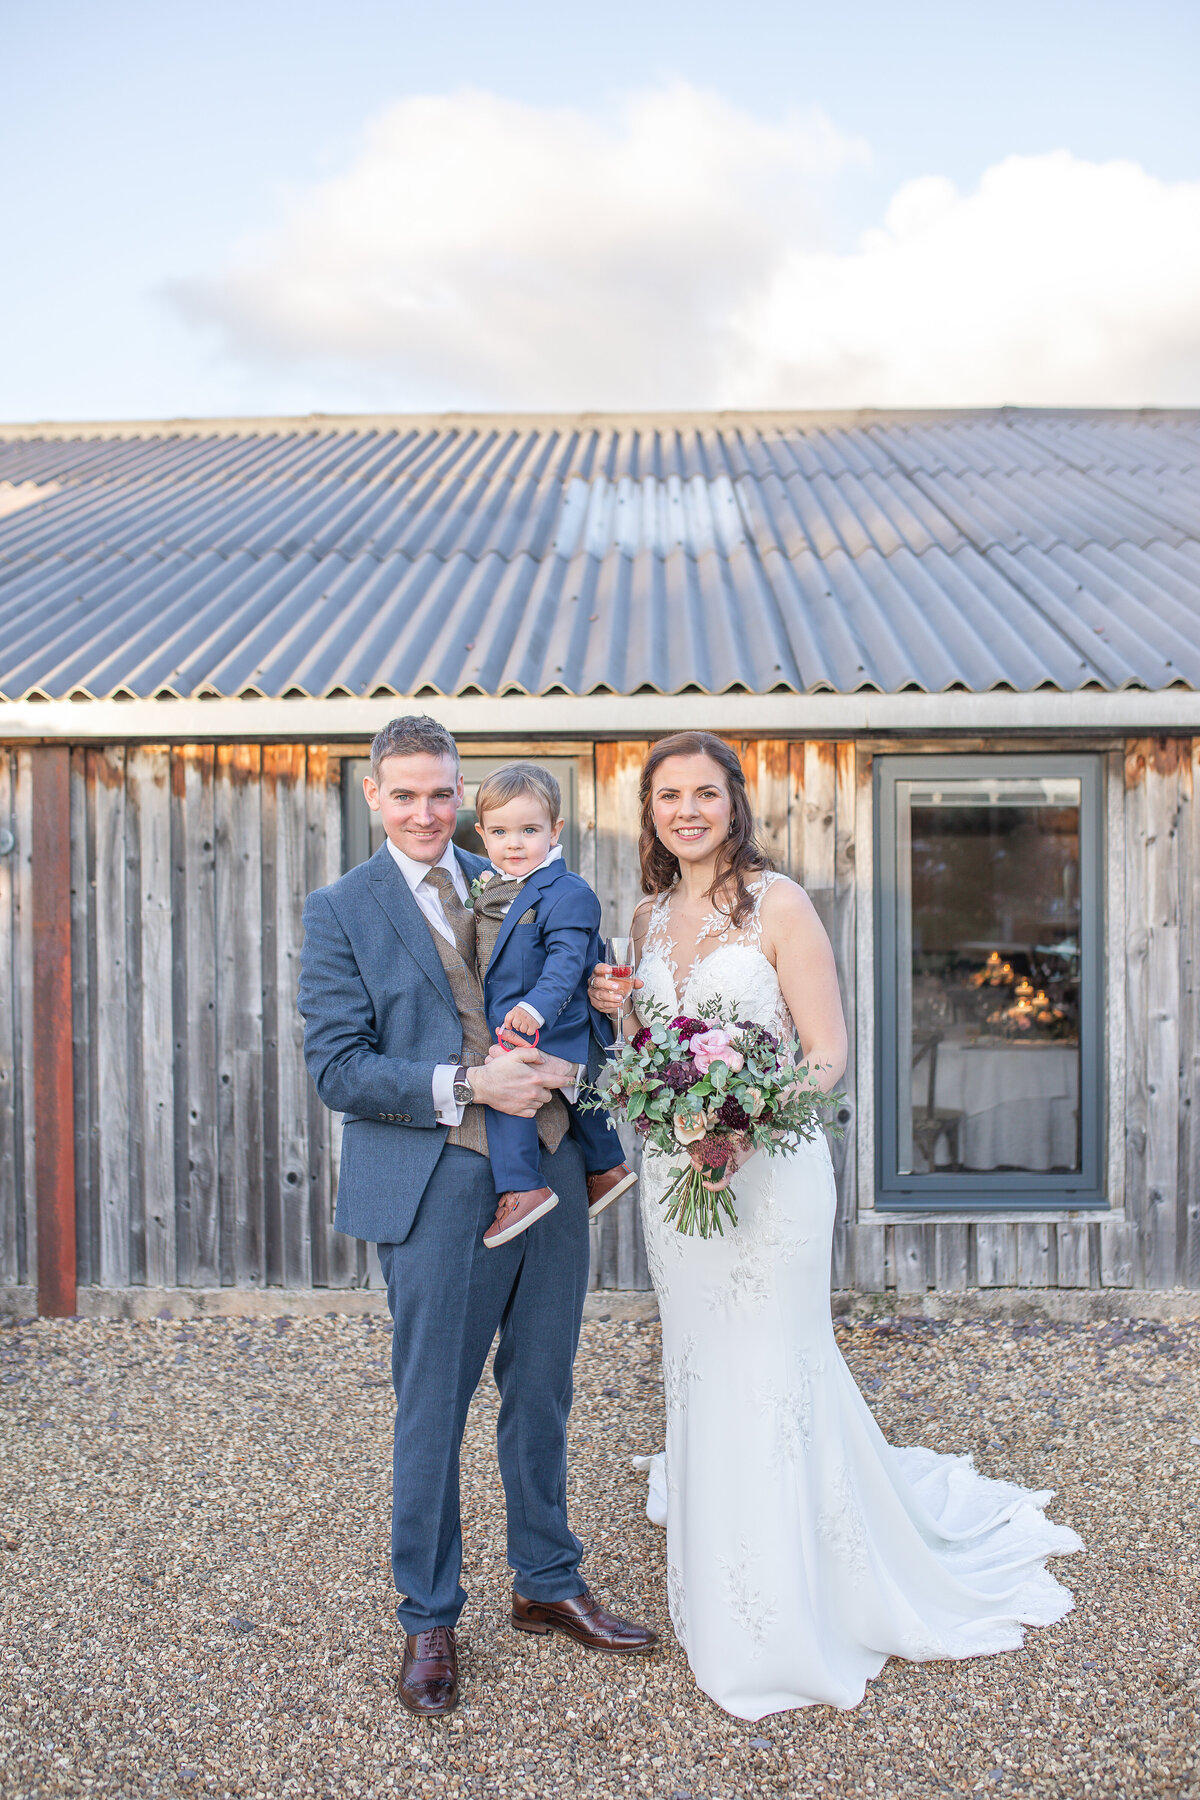 Bride and groom group photo with son standing outside wedding barn